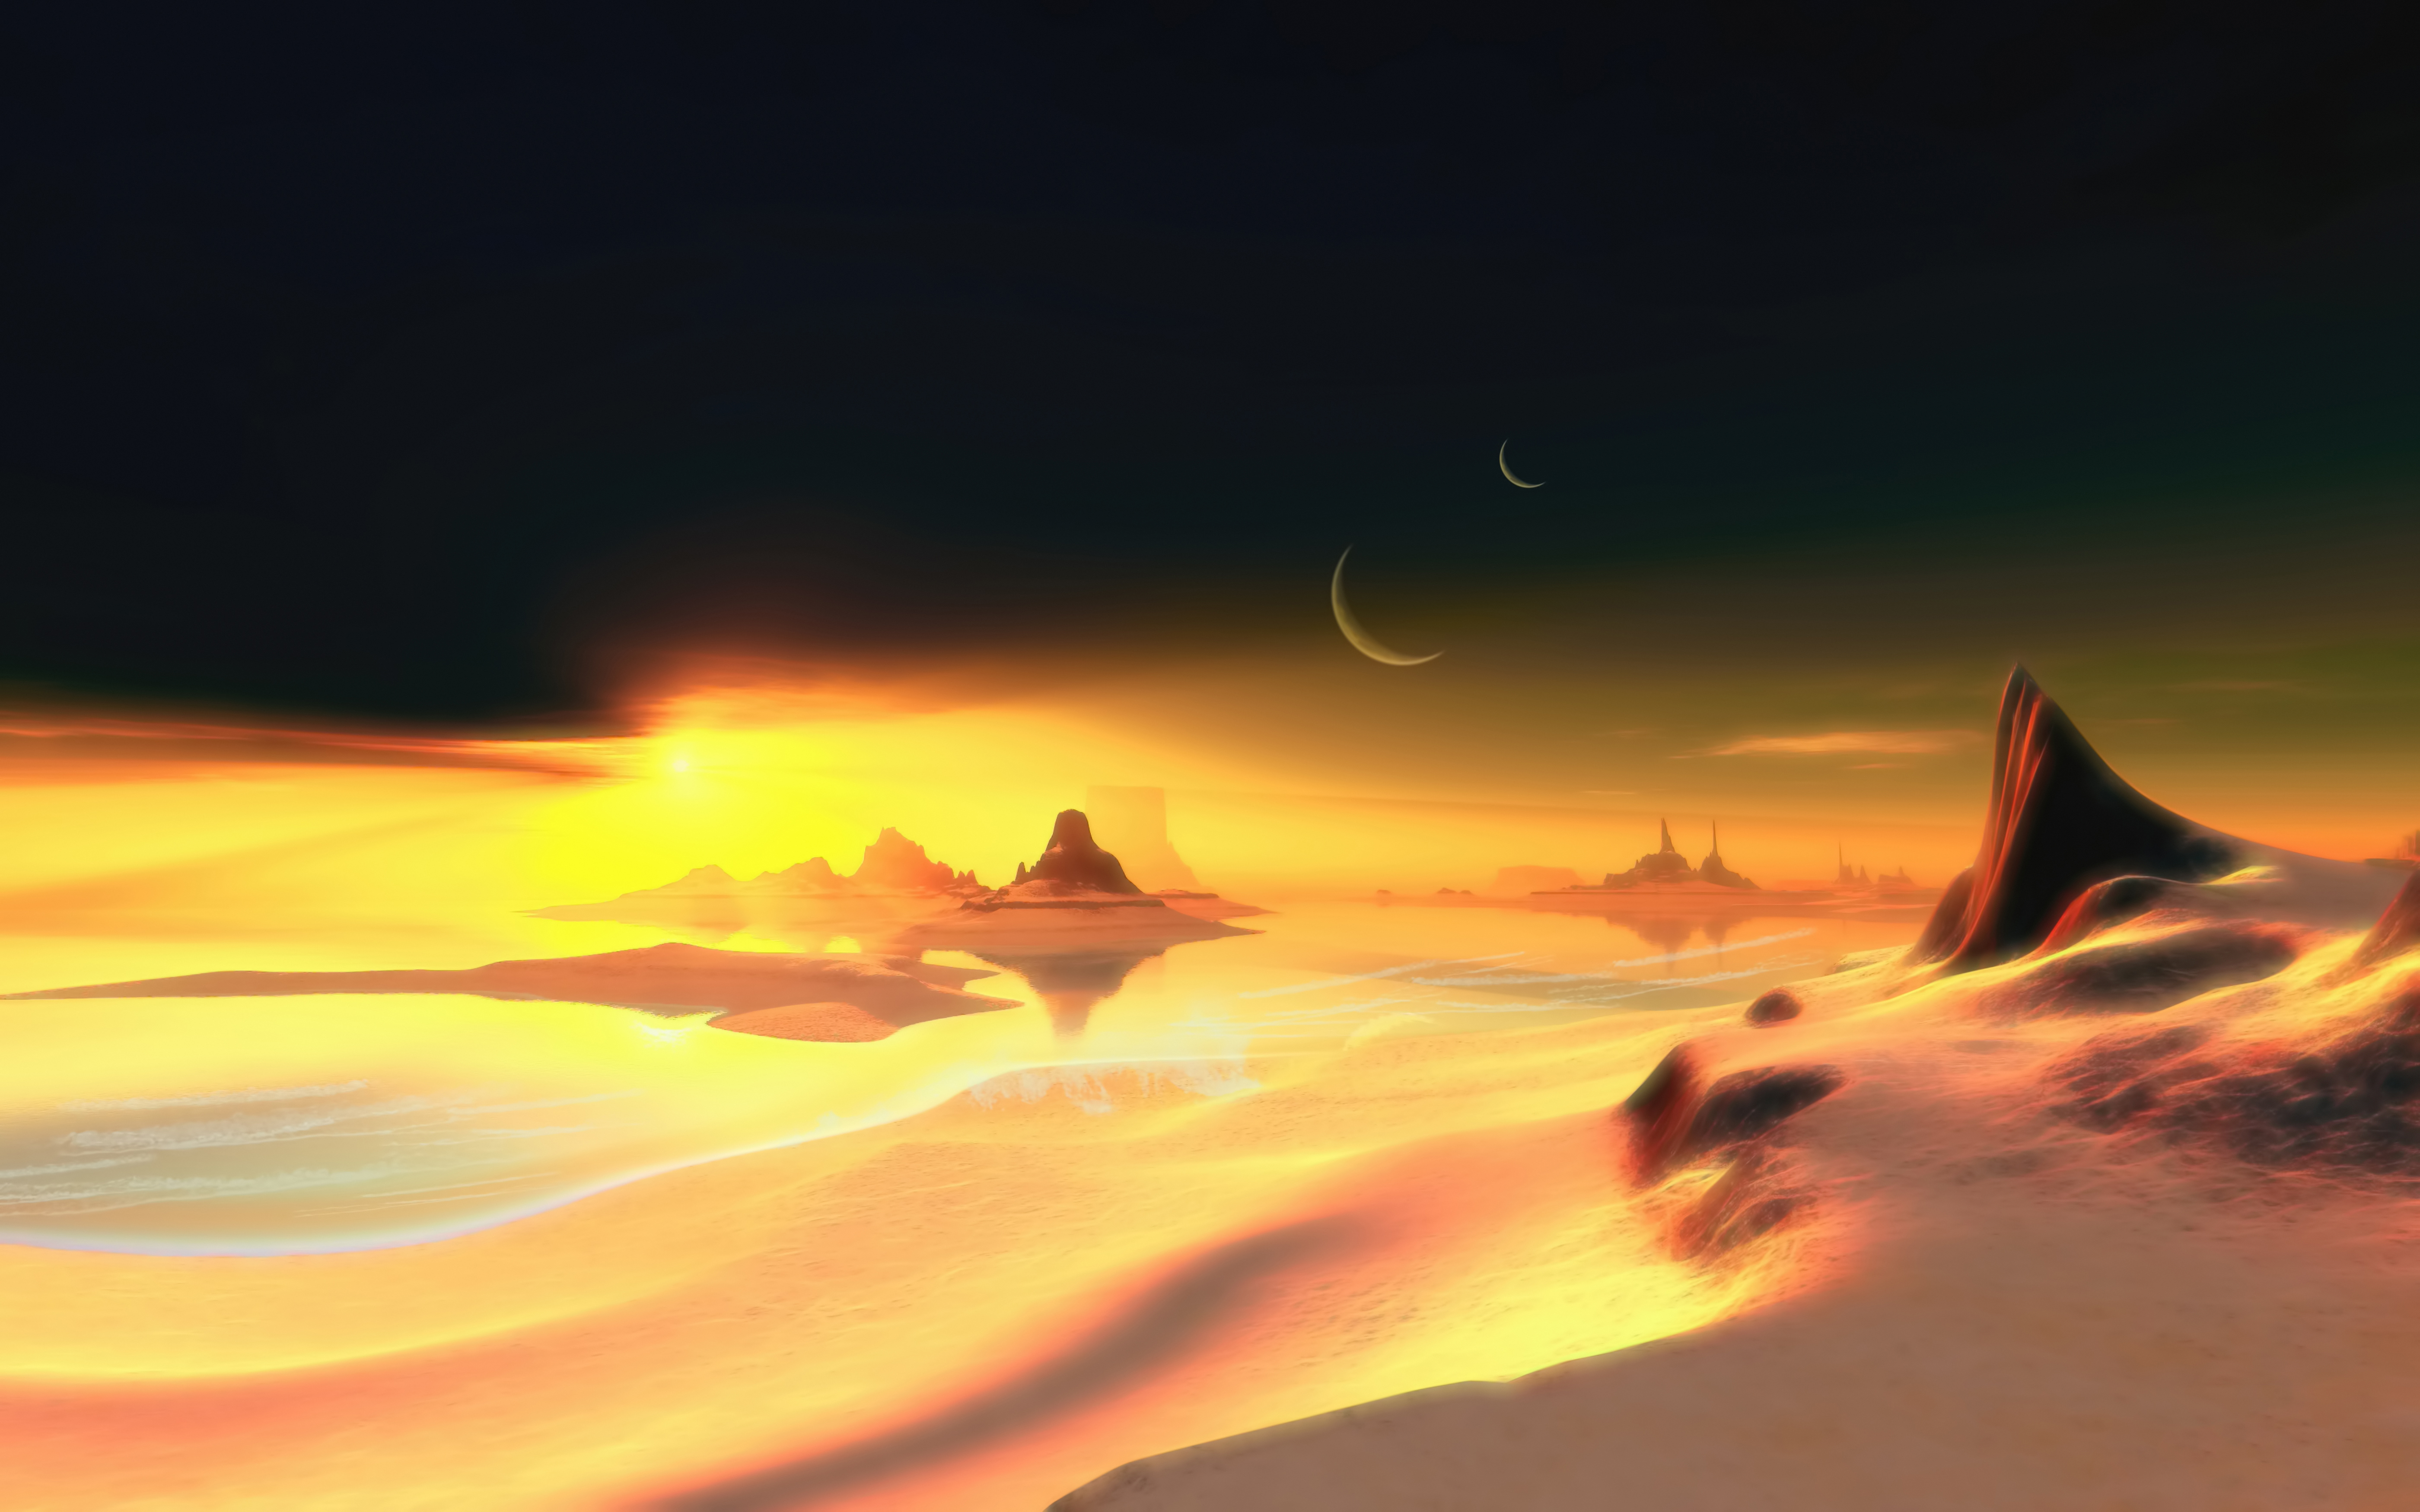 Download Dune 2021 wallpapers for mobile phone free Dune 2021 HD  pictures